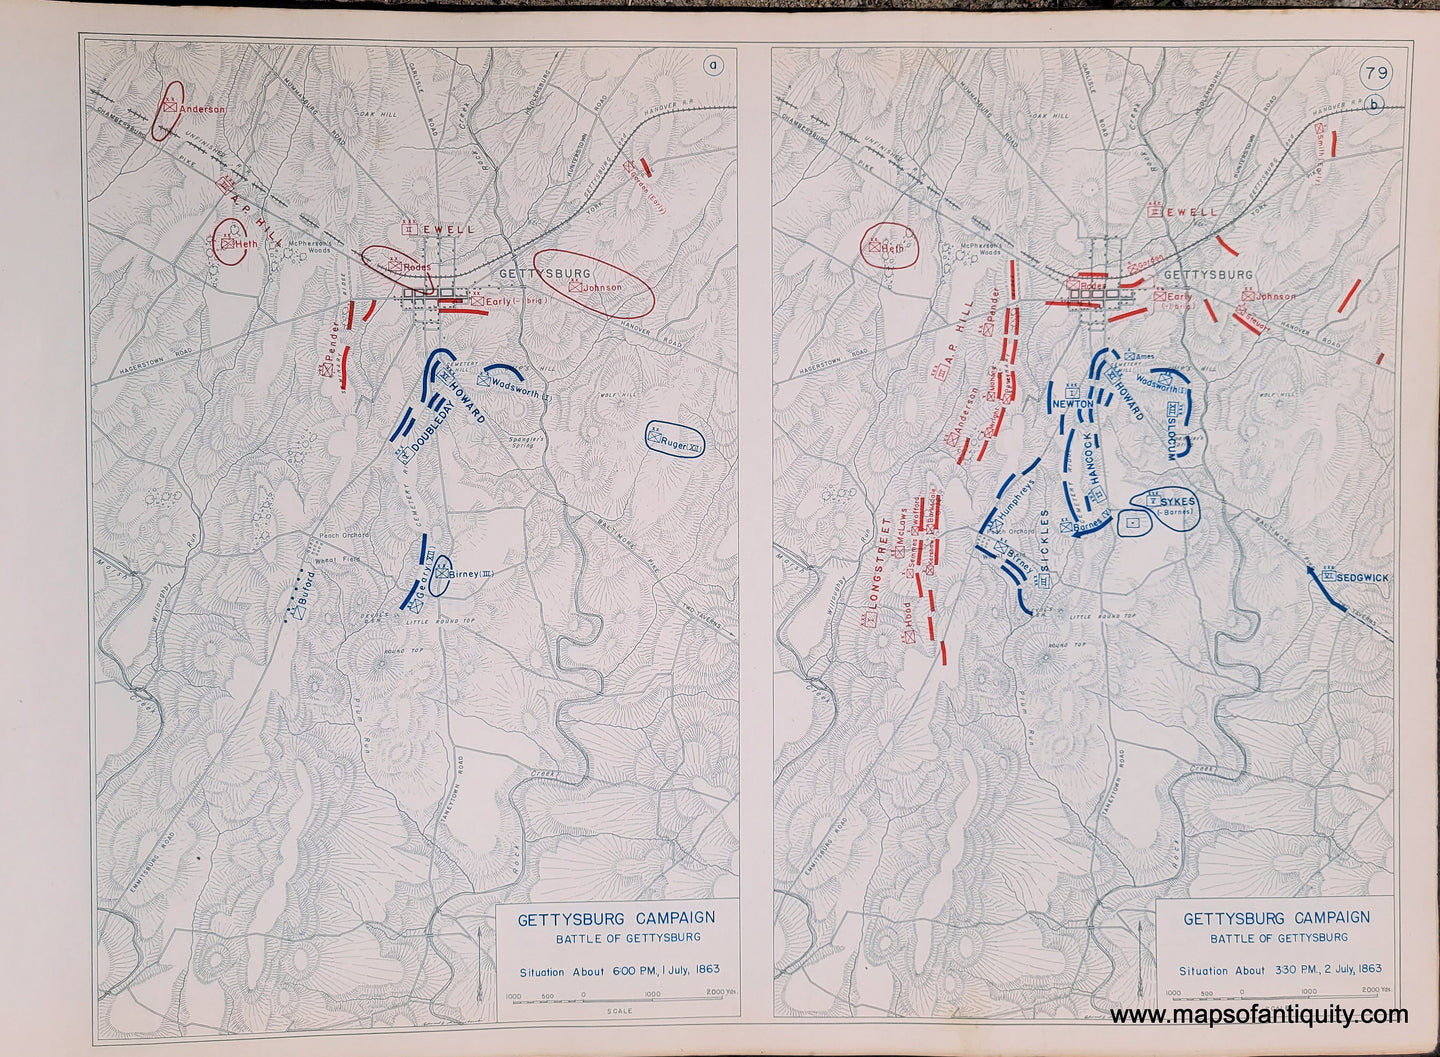 Genuine-Antique-Map-Gettysburg-Campaign-Battle-of-Gettysburg-Situation-About-6-00-PM-1-July-1863-and-Situation-About-3-30-PM-2-July-1863-1948-Matthew-Forney-Steele-Dept-of-Military-Art-and-Engineering-US-Military-Academy-West-Point-Maps-Of-Antiquity